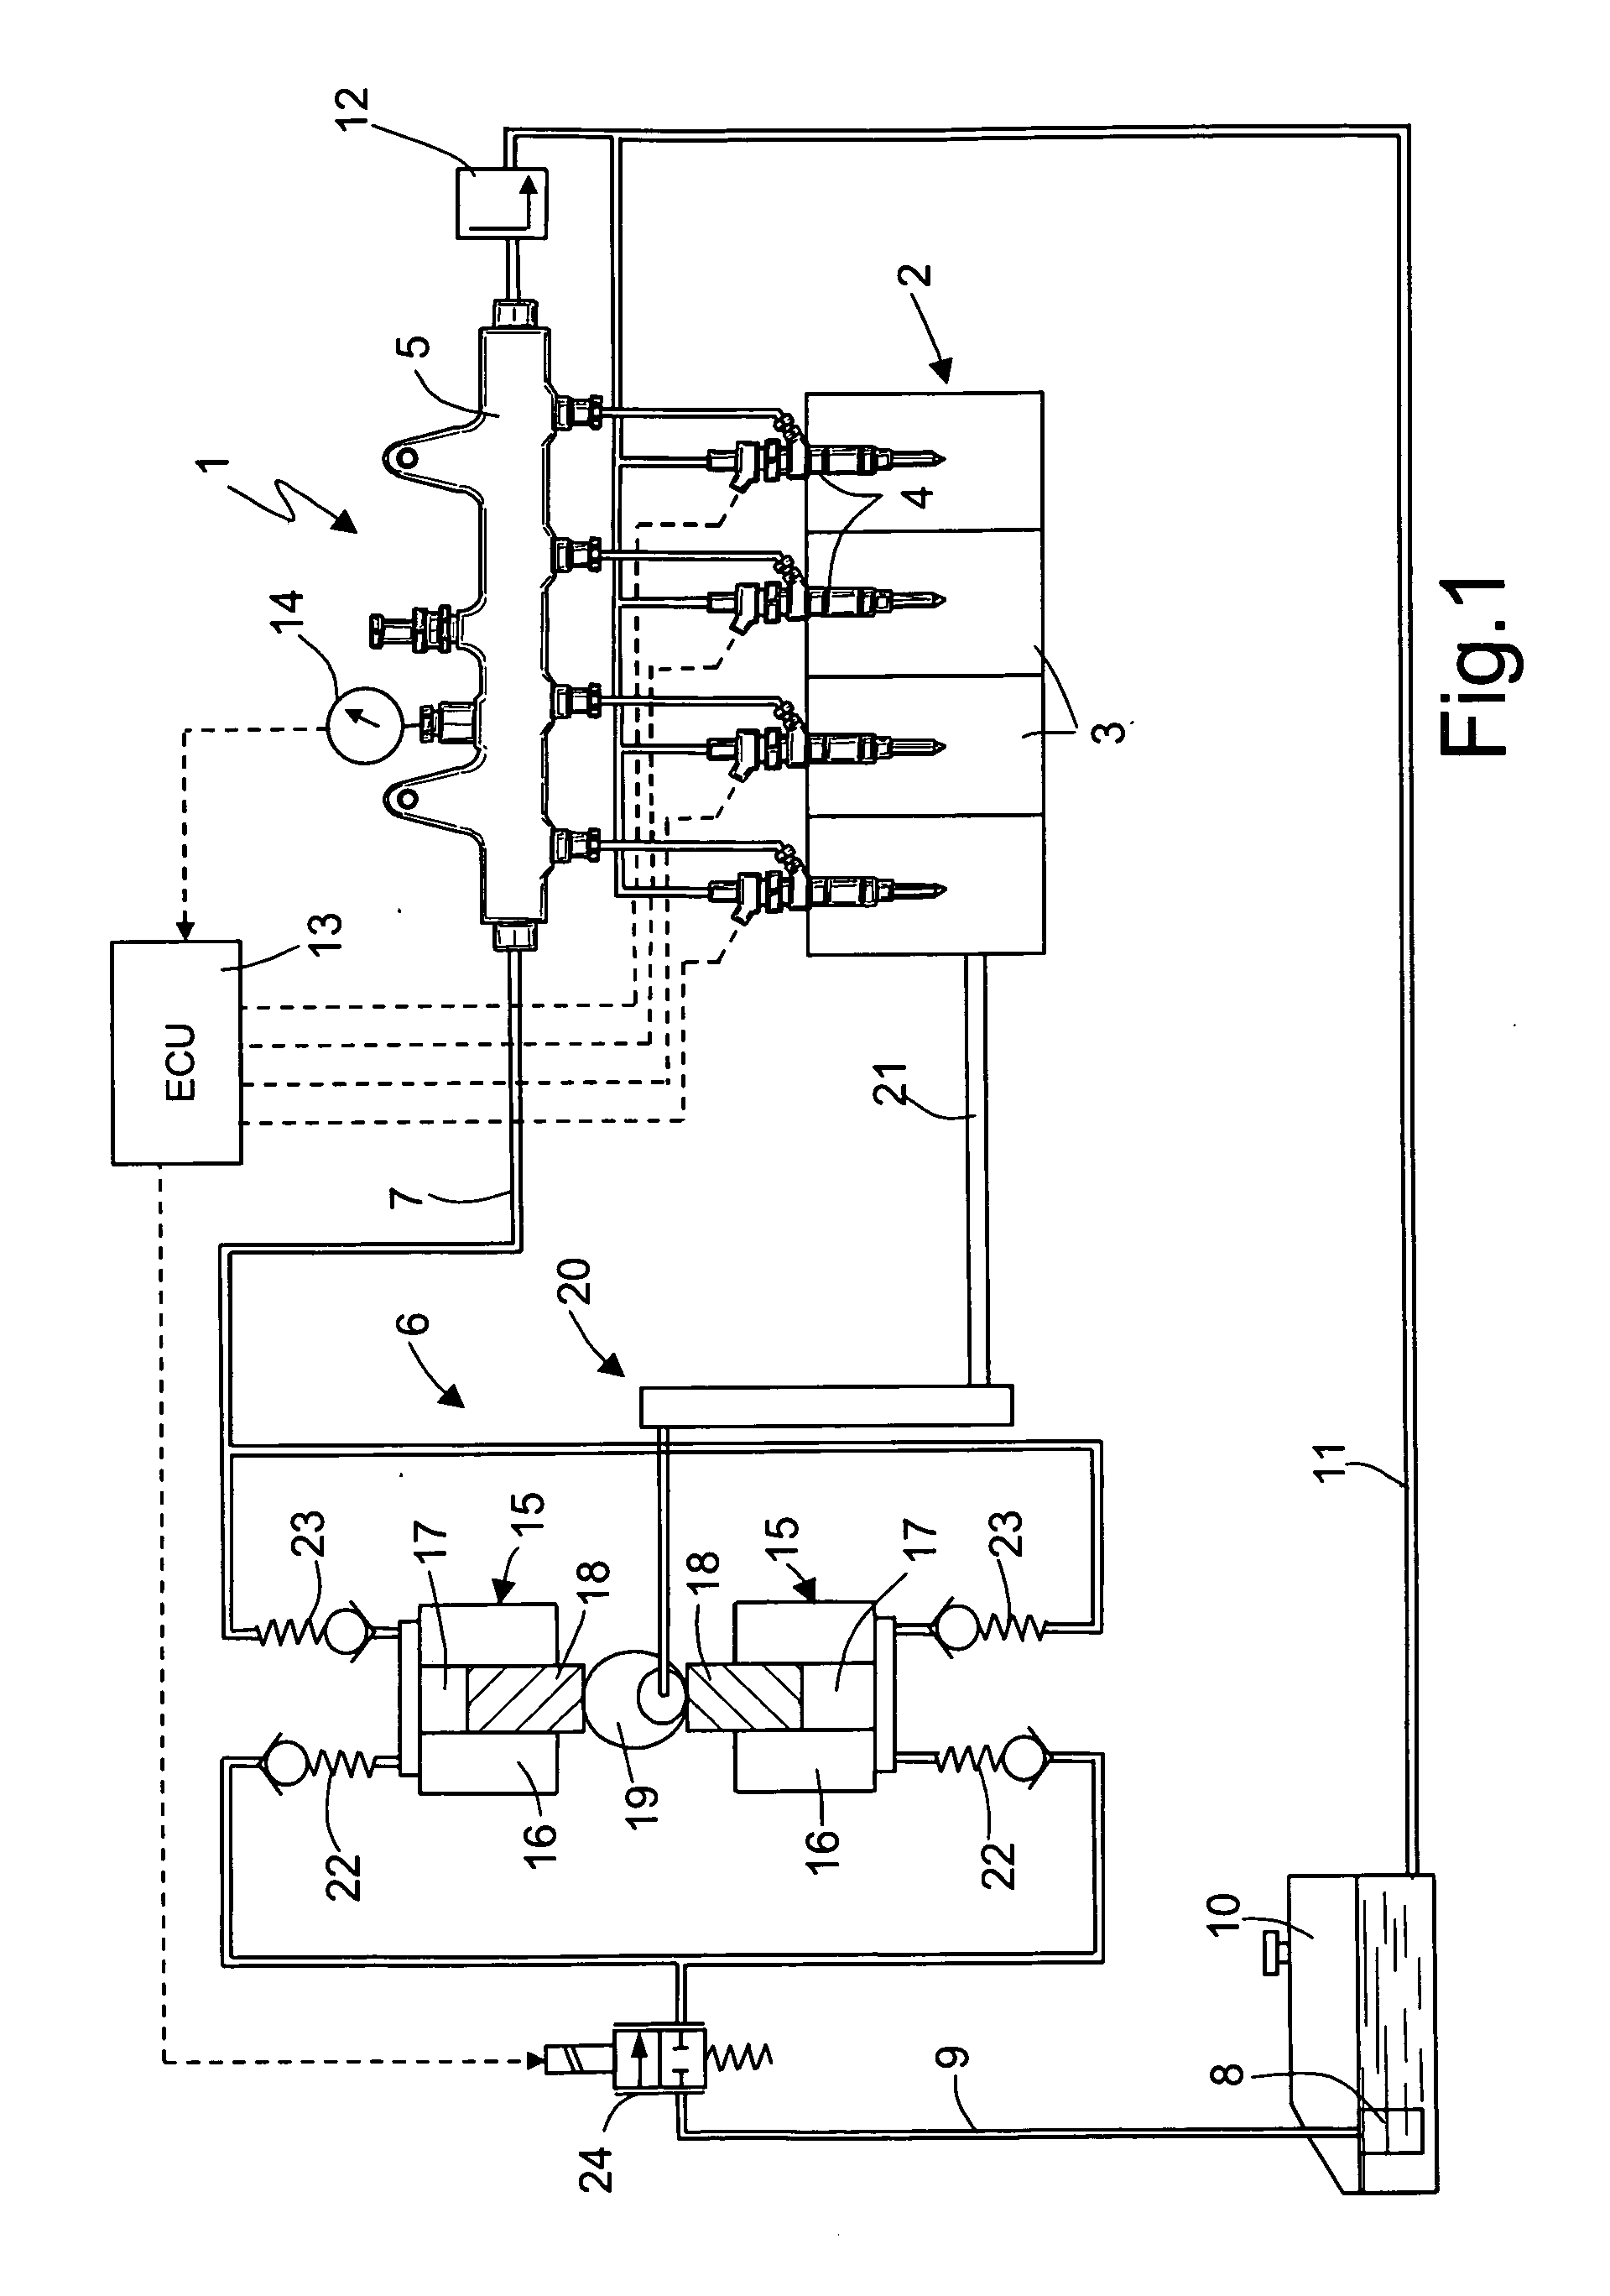 Control method for a direct injection system of the common-rail type provided with a shut-off valve for controlling the flow rate of a high-pressure fuel pump